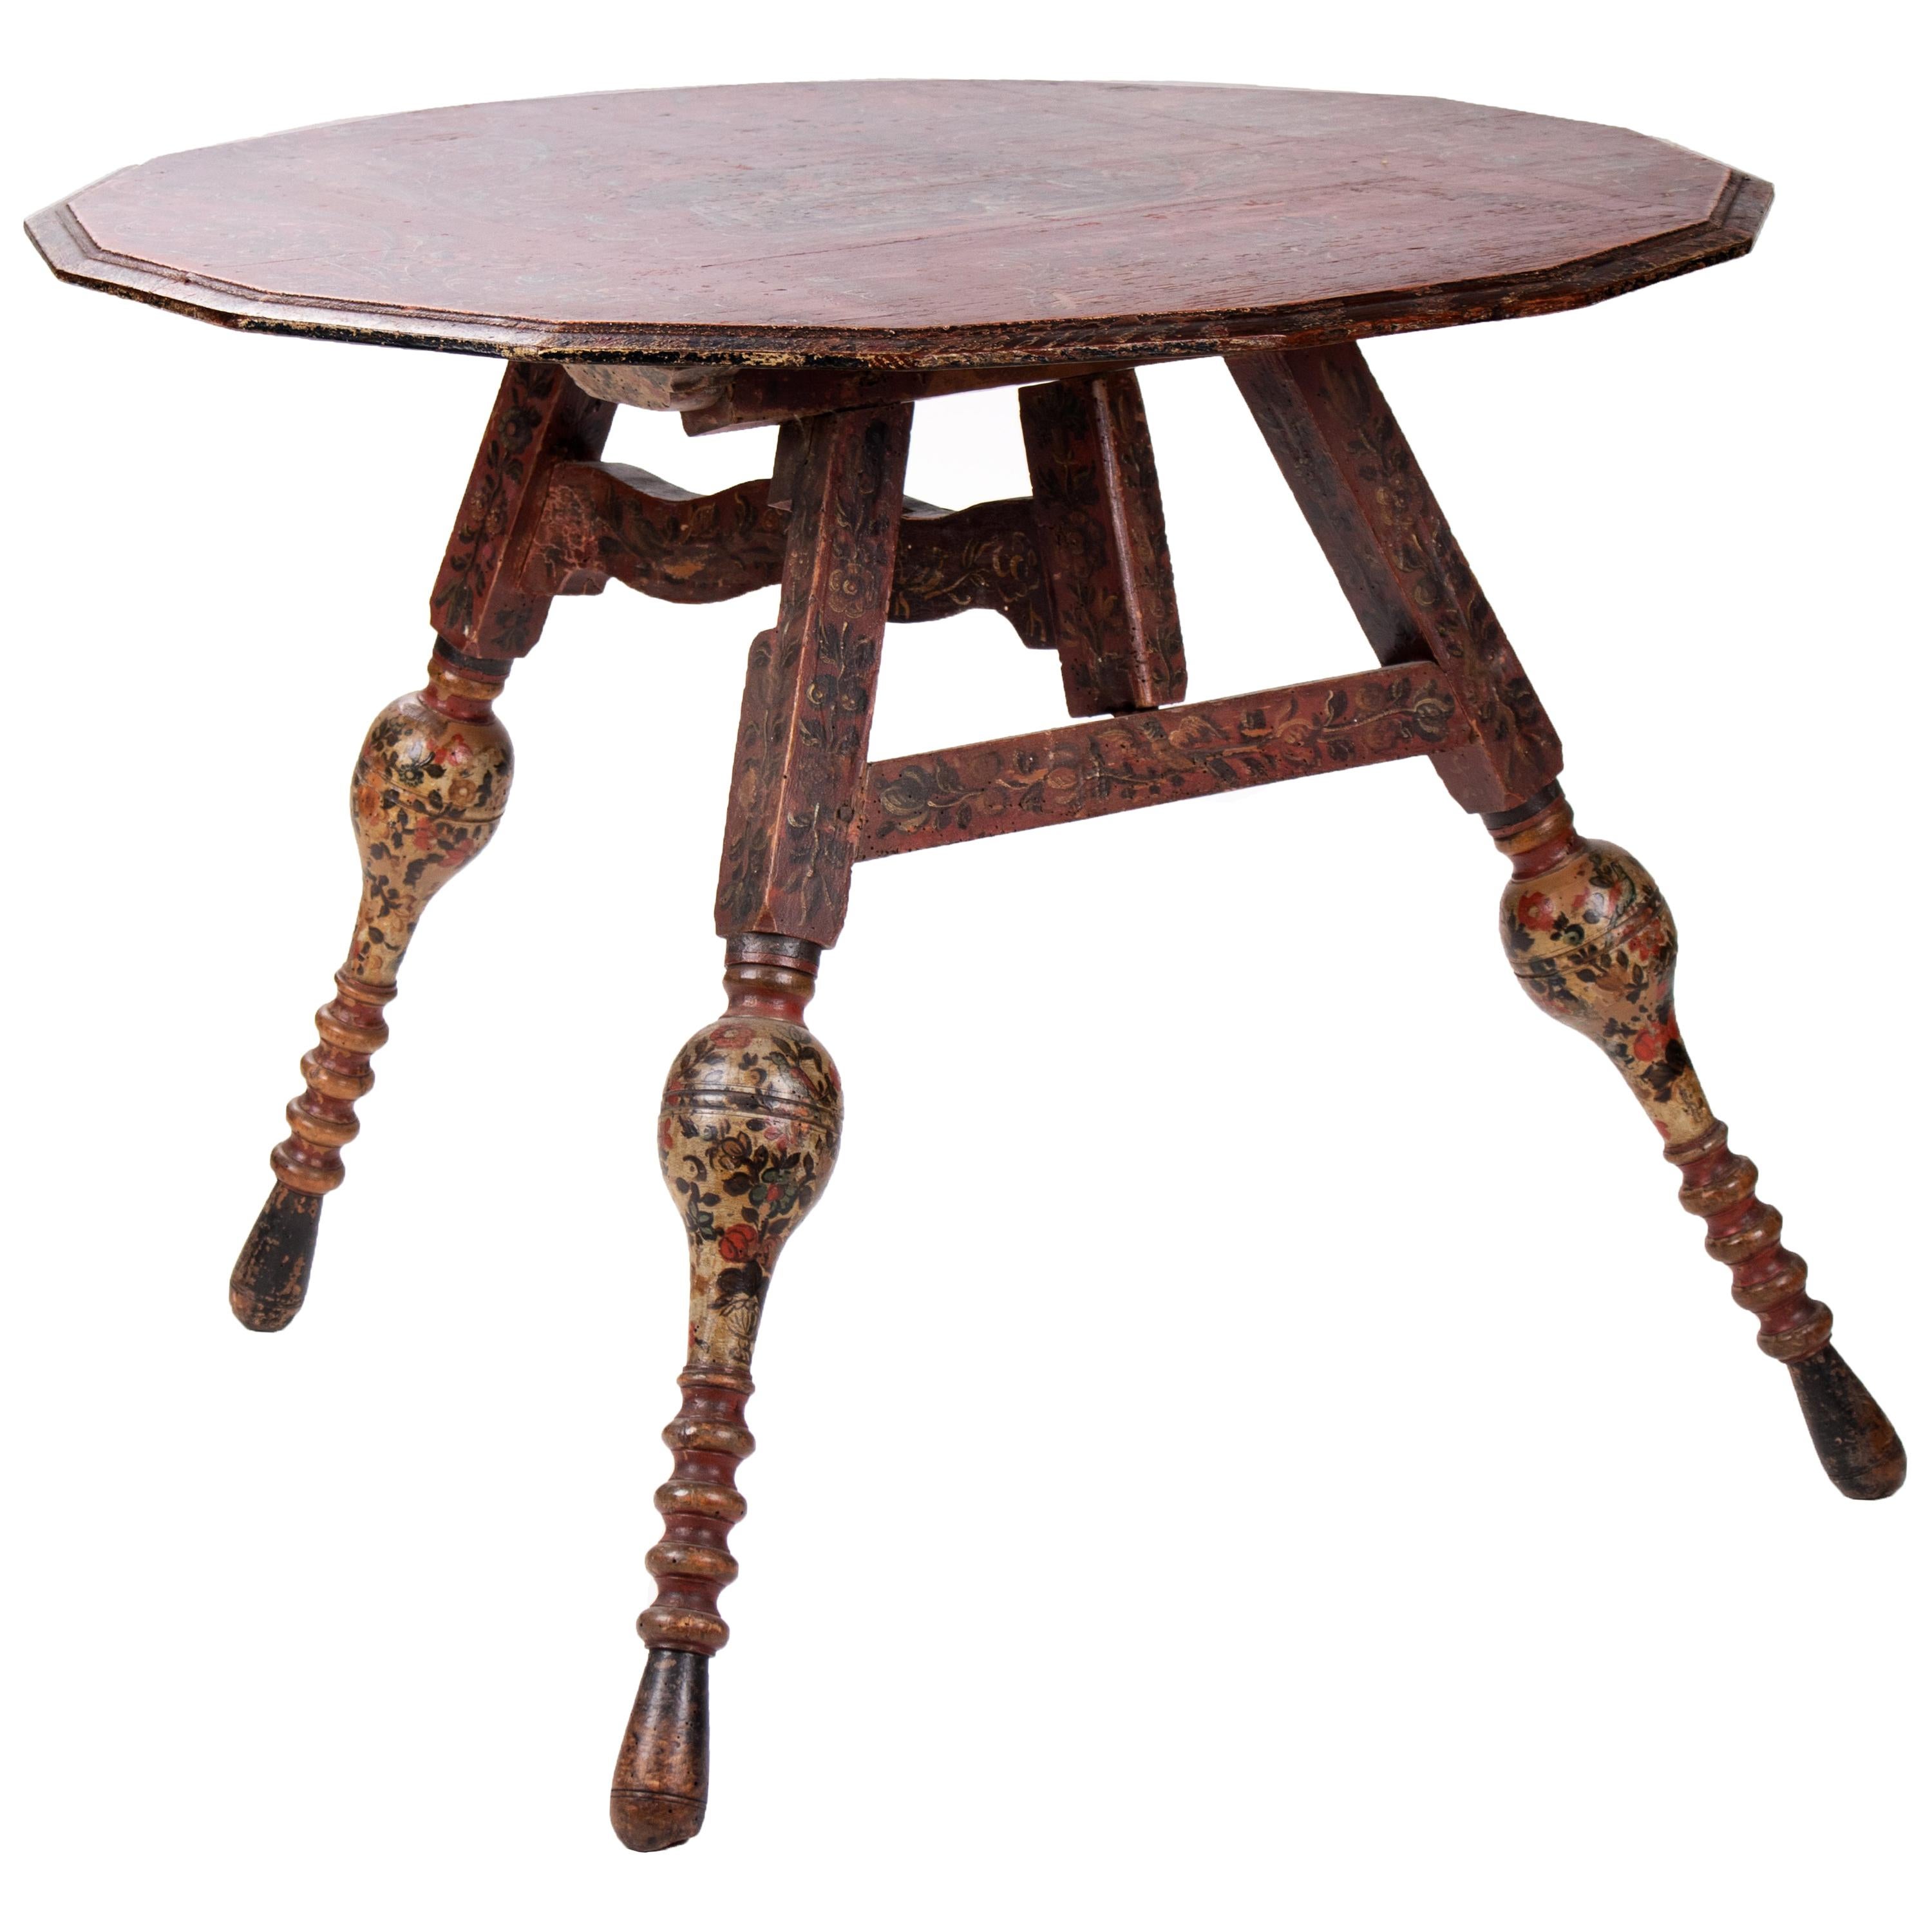 Three-Legged Painted Table with People and Flower Motifs, 17th Century, Italian